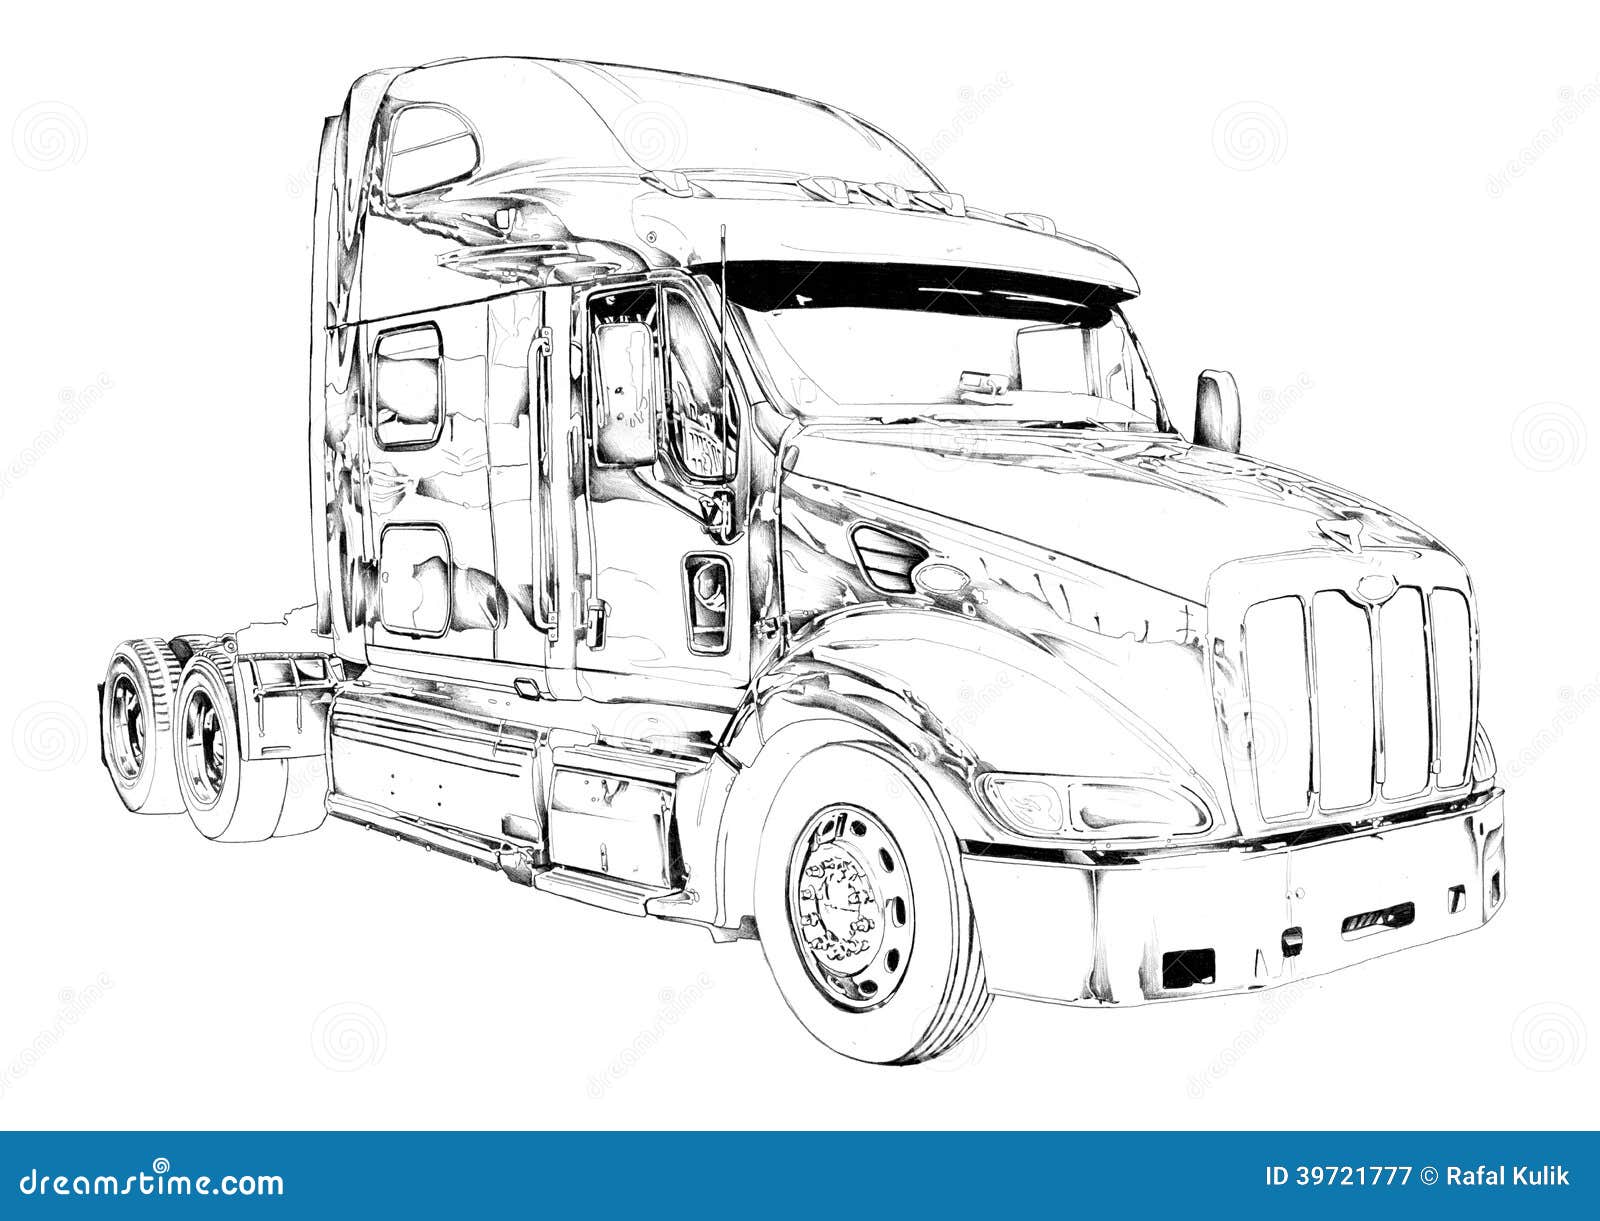 Traditional Vehicles Stock Illustrations – 186 Traditional Vehicles Stock Illustrations, Vectors & Clipart - Dreamstime